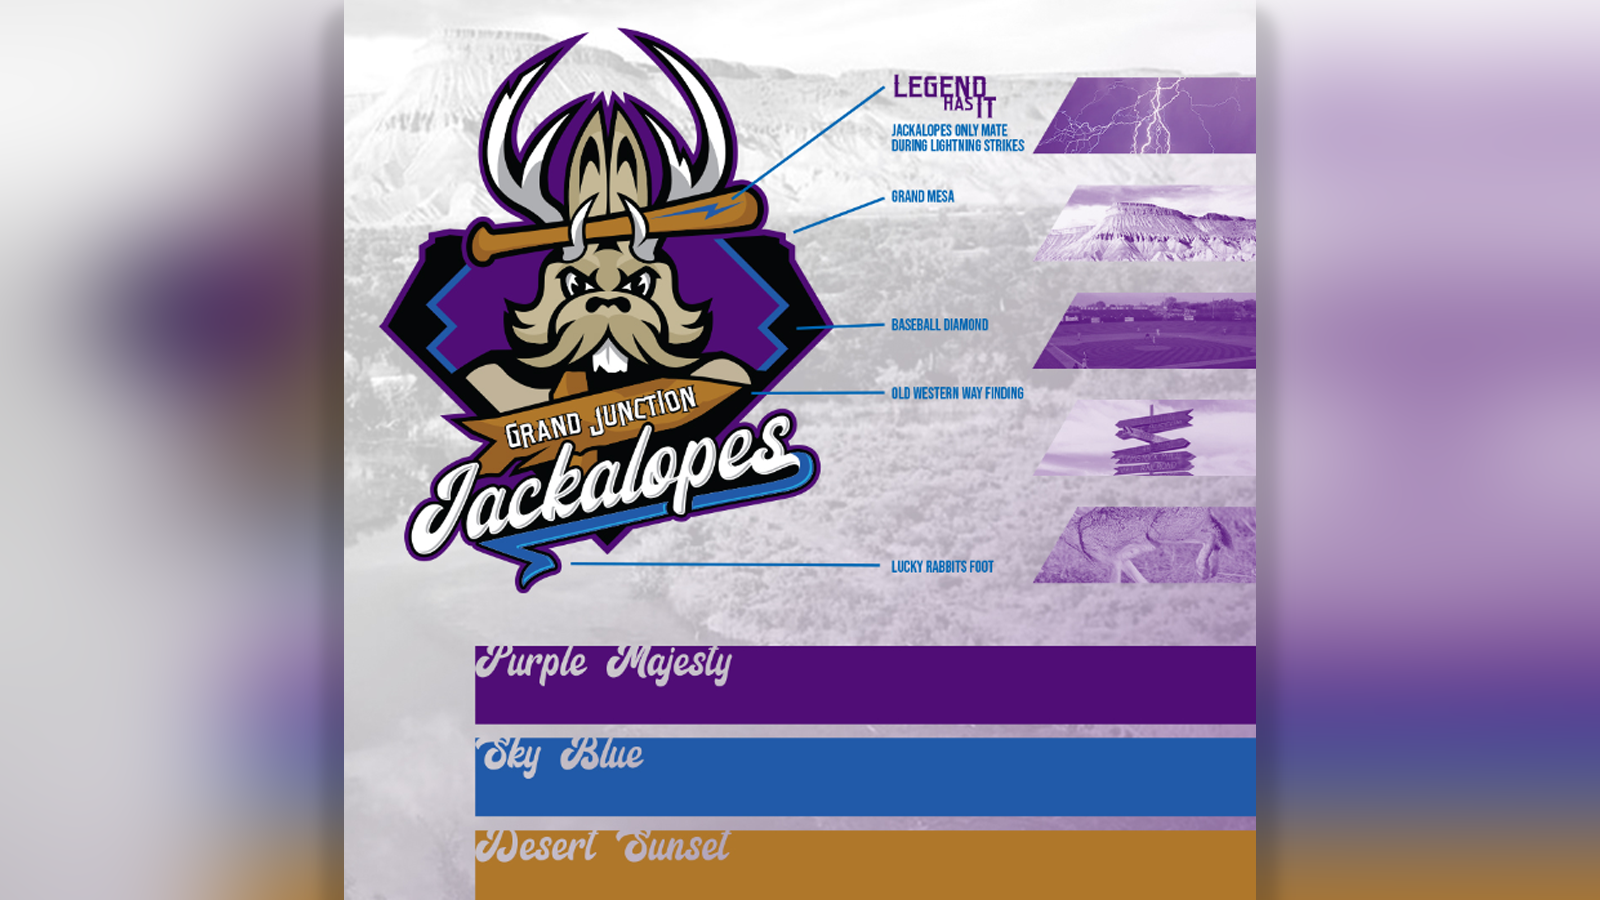 The Grand Junction Rockies' work with the Challenger Baseball League, in  pictures - Purple Row